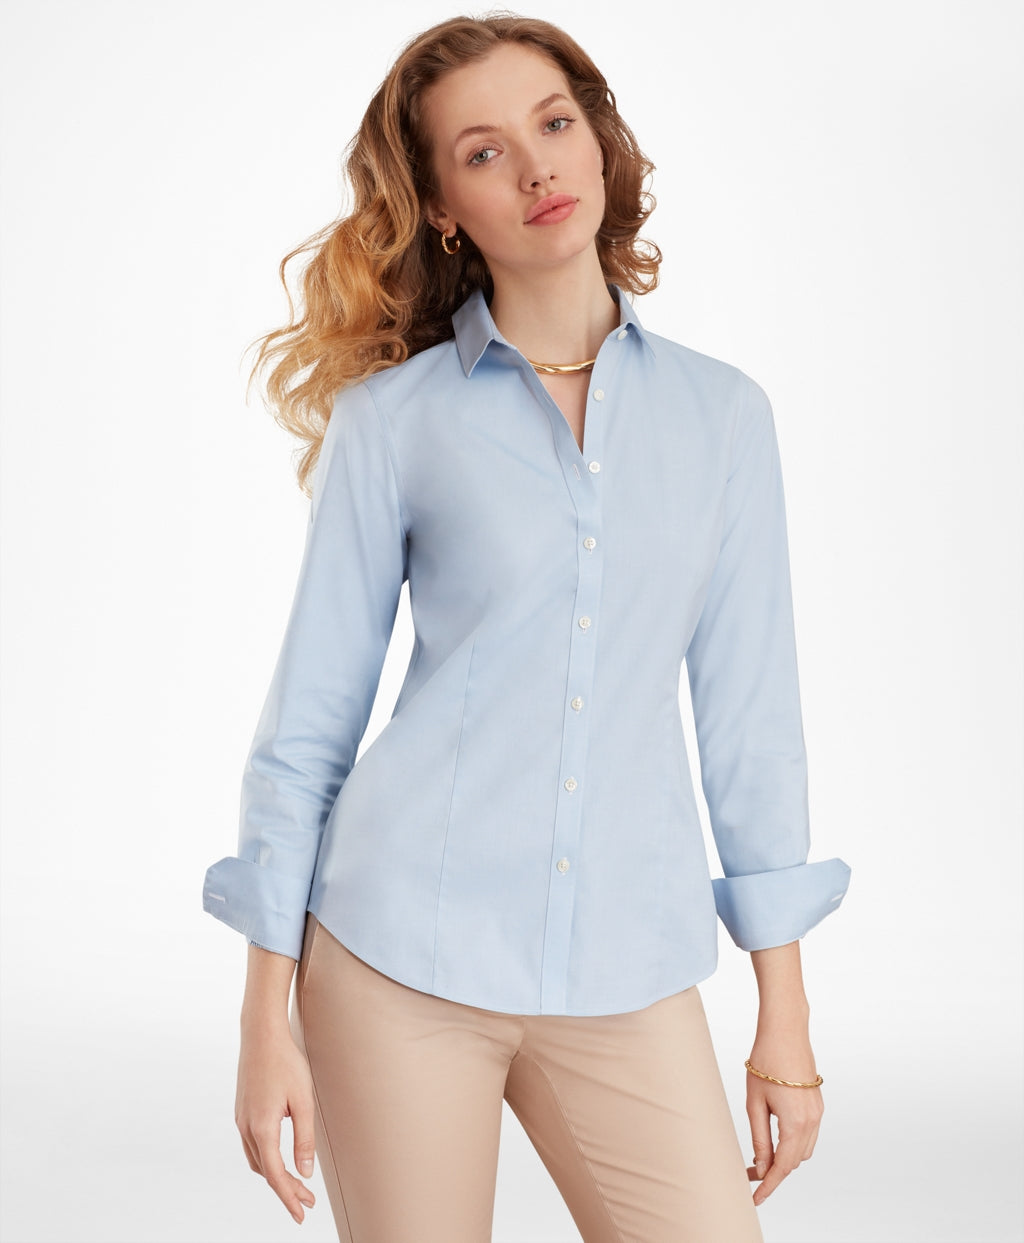 Women's Shirts & Tops – Brooks Brothers Canada